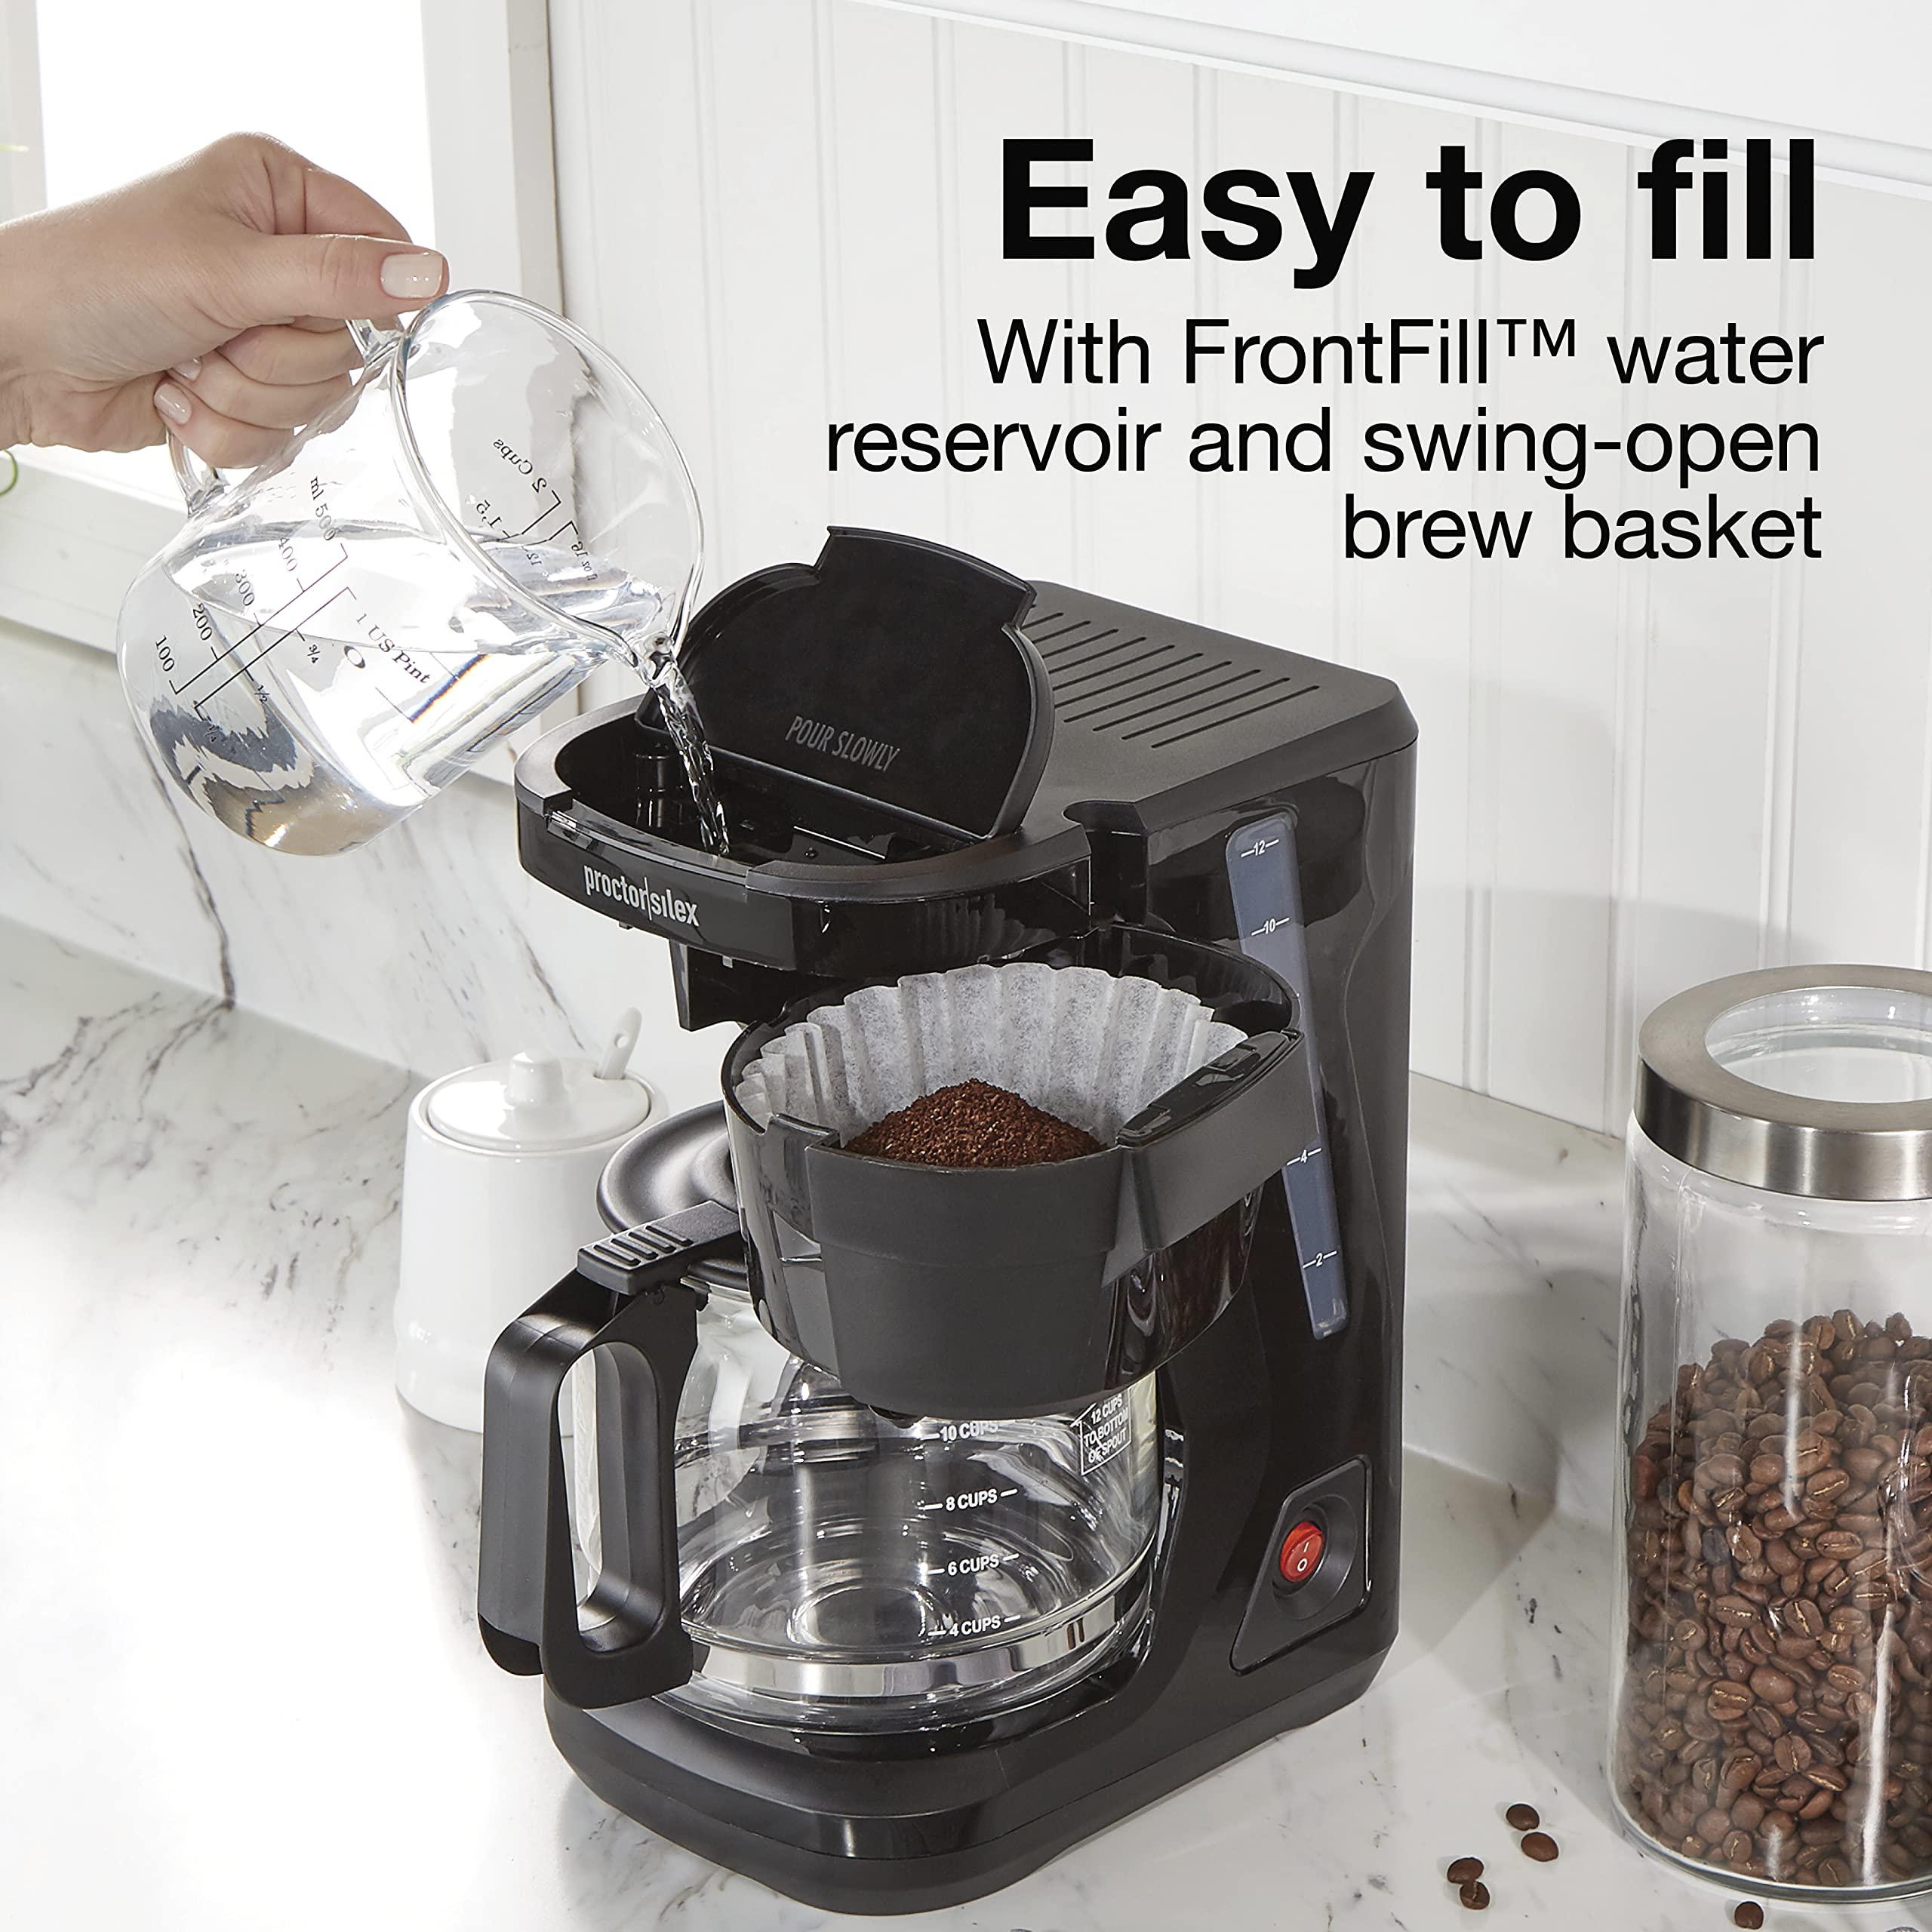 proctor silex frontfill drip coffee maker, 12 cup glass carafe, black and silver (43680ps)